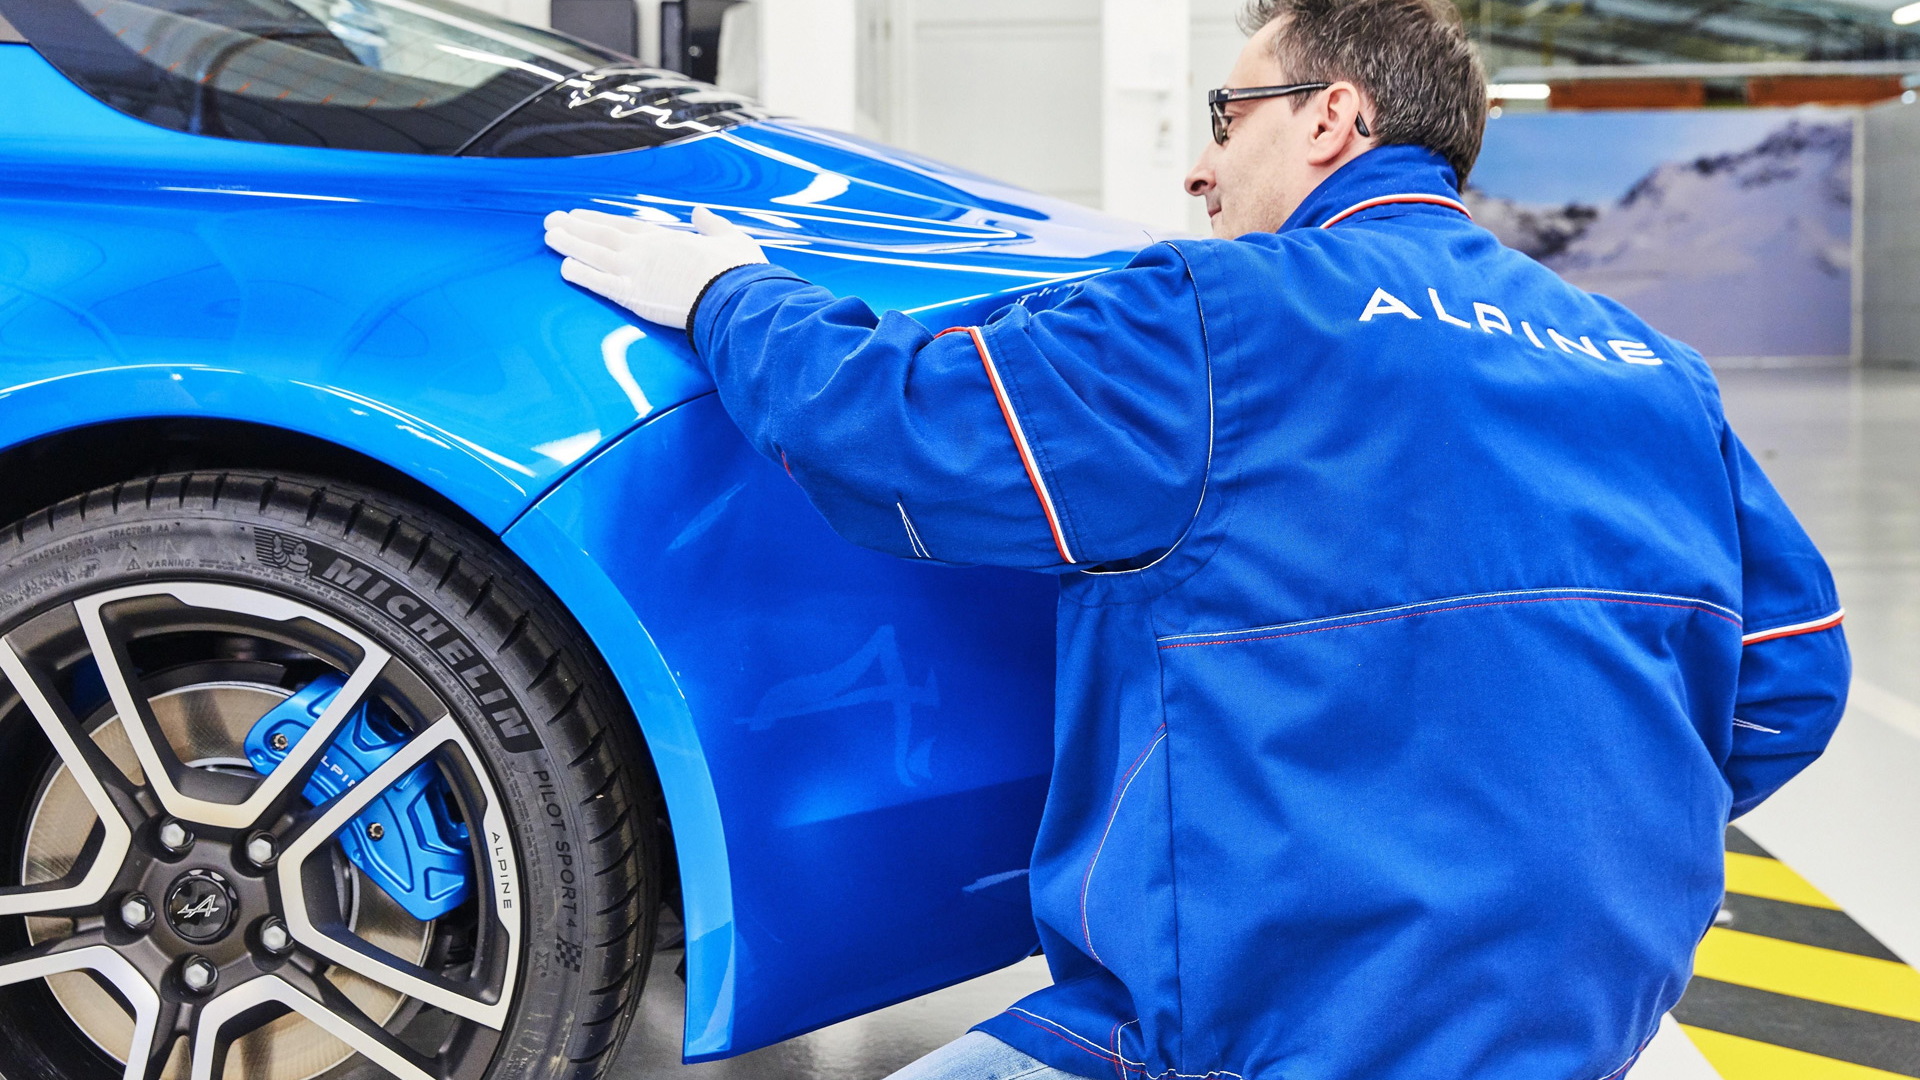 Alpine A110 production in Dieppe, France